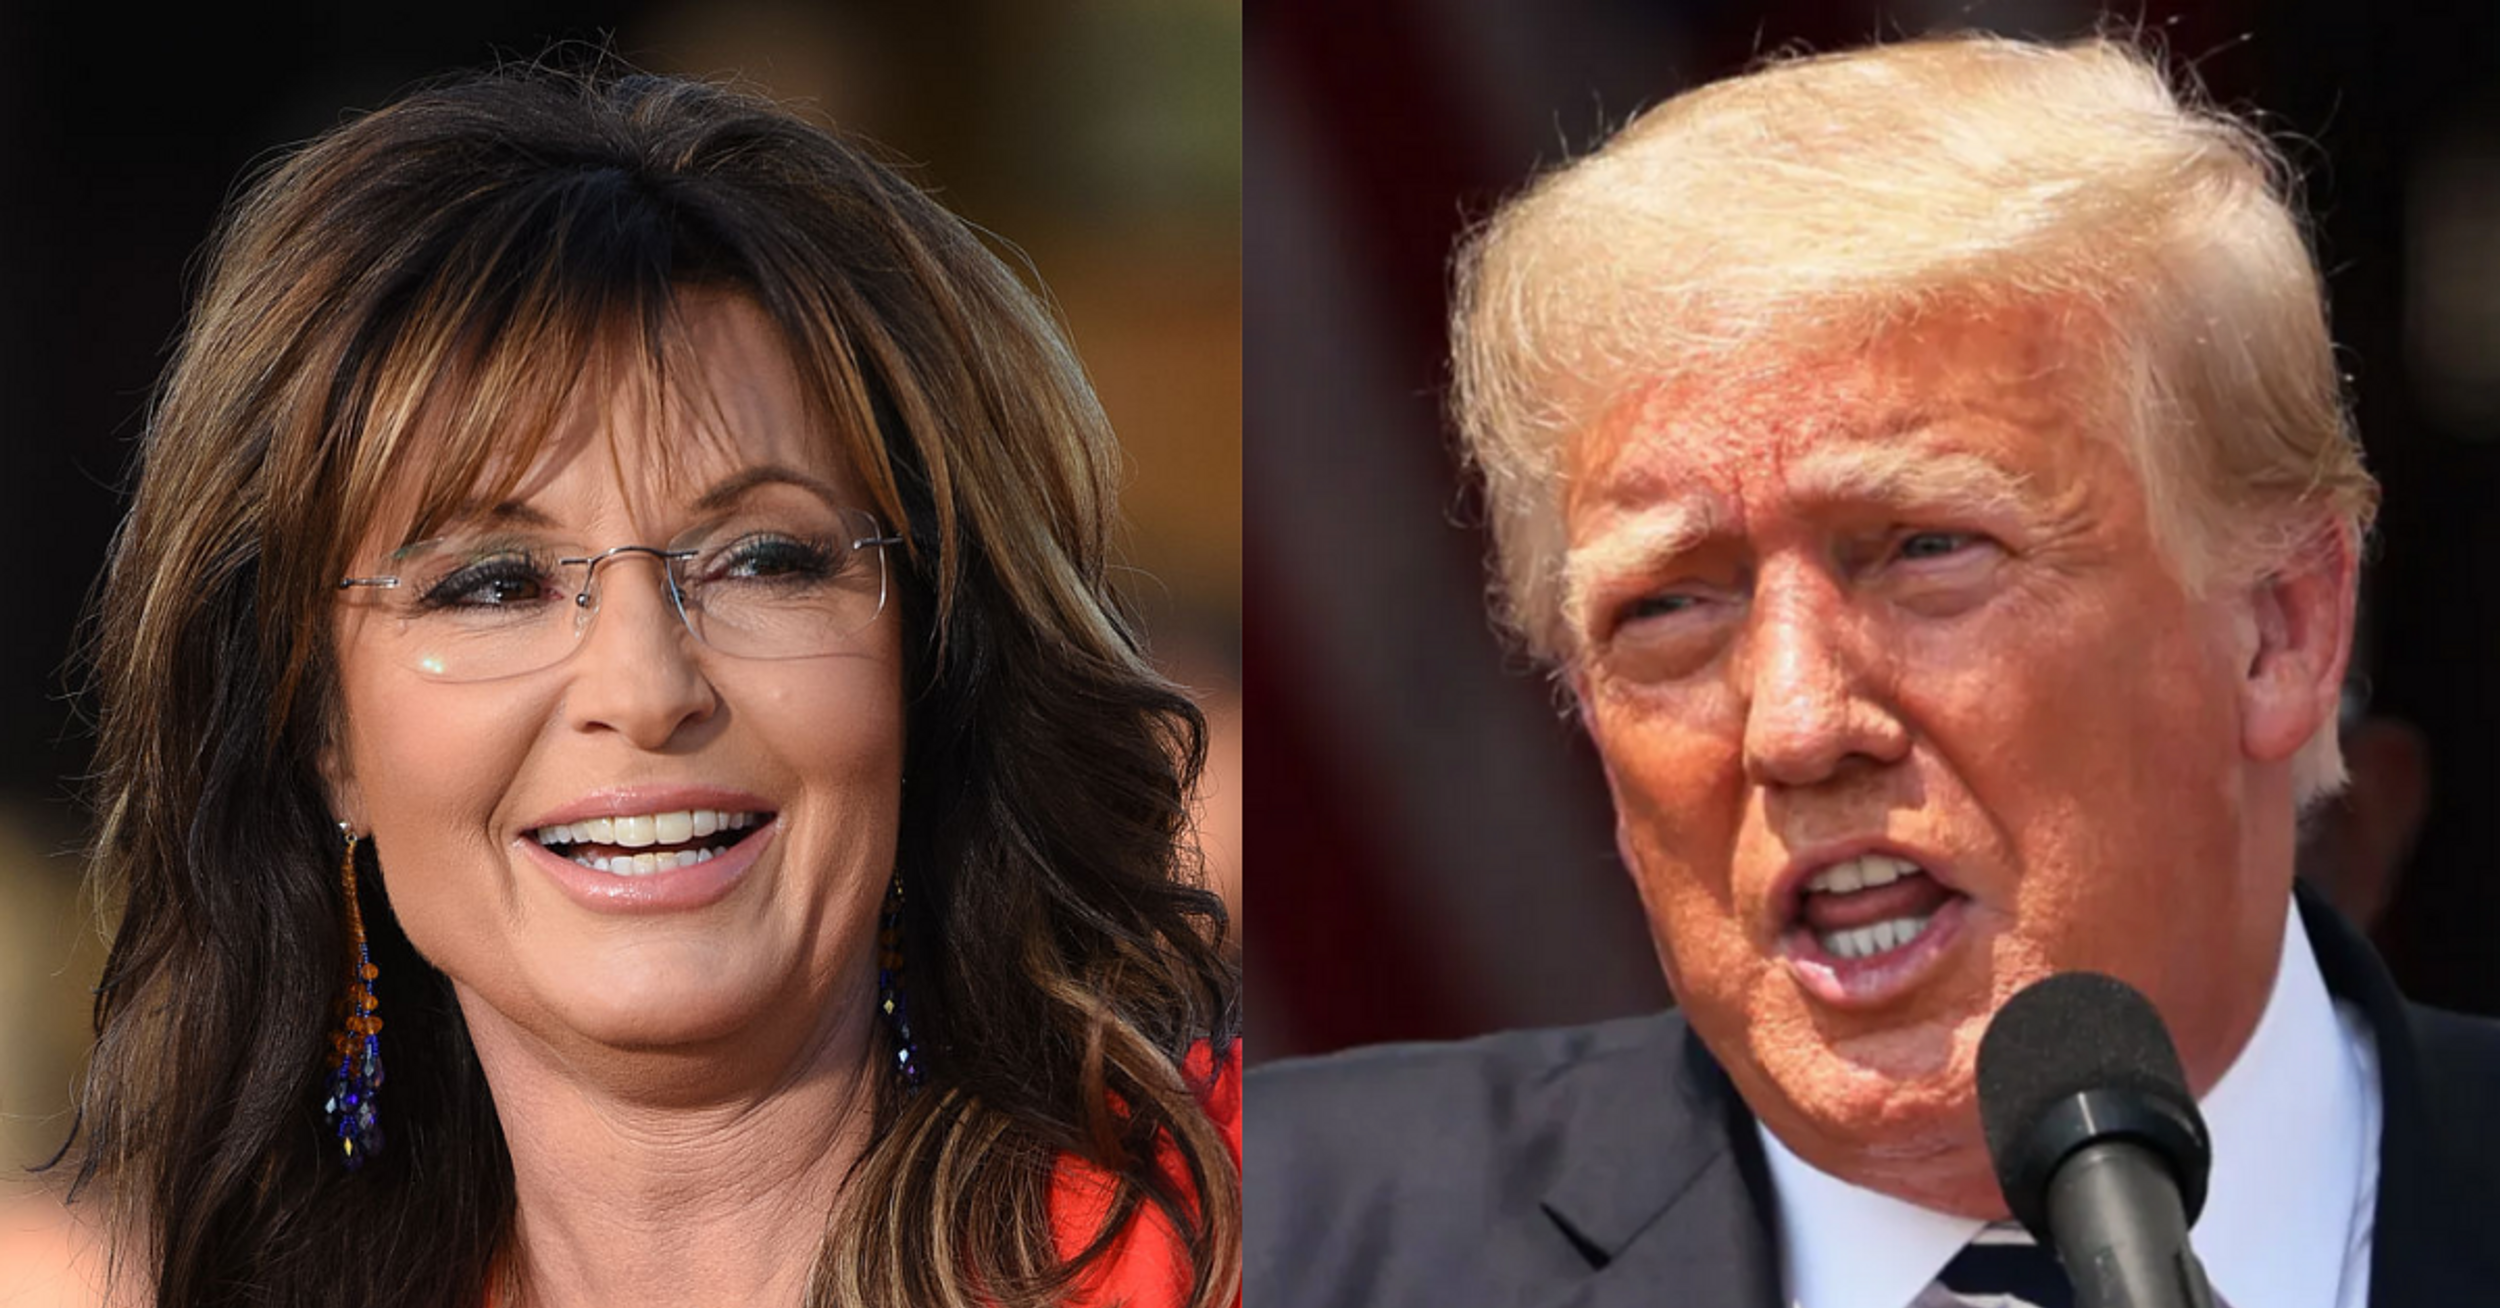 Trump Just Revealed He's Endorsing Sarah Palin For Congress For The Most Trumpian Reason Ever